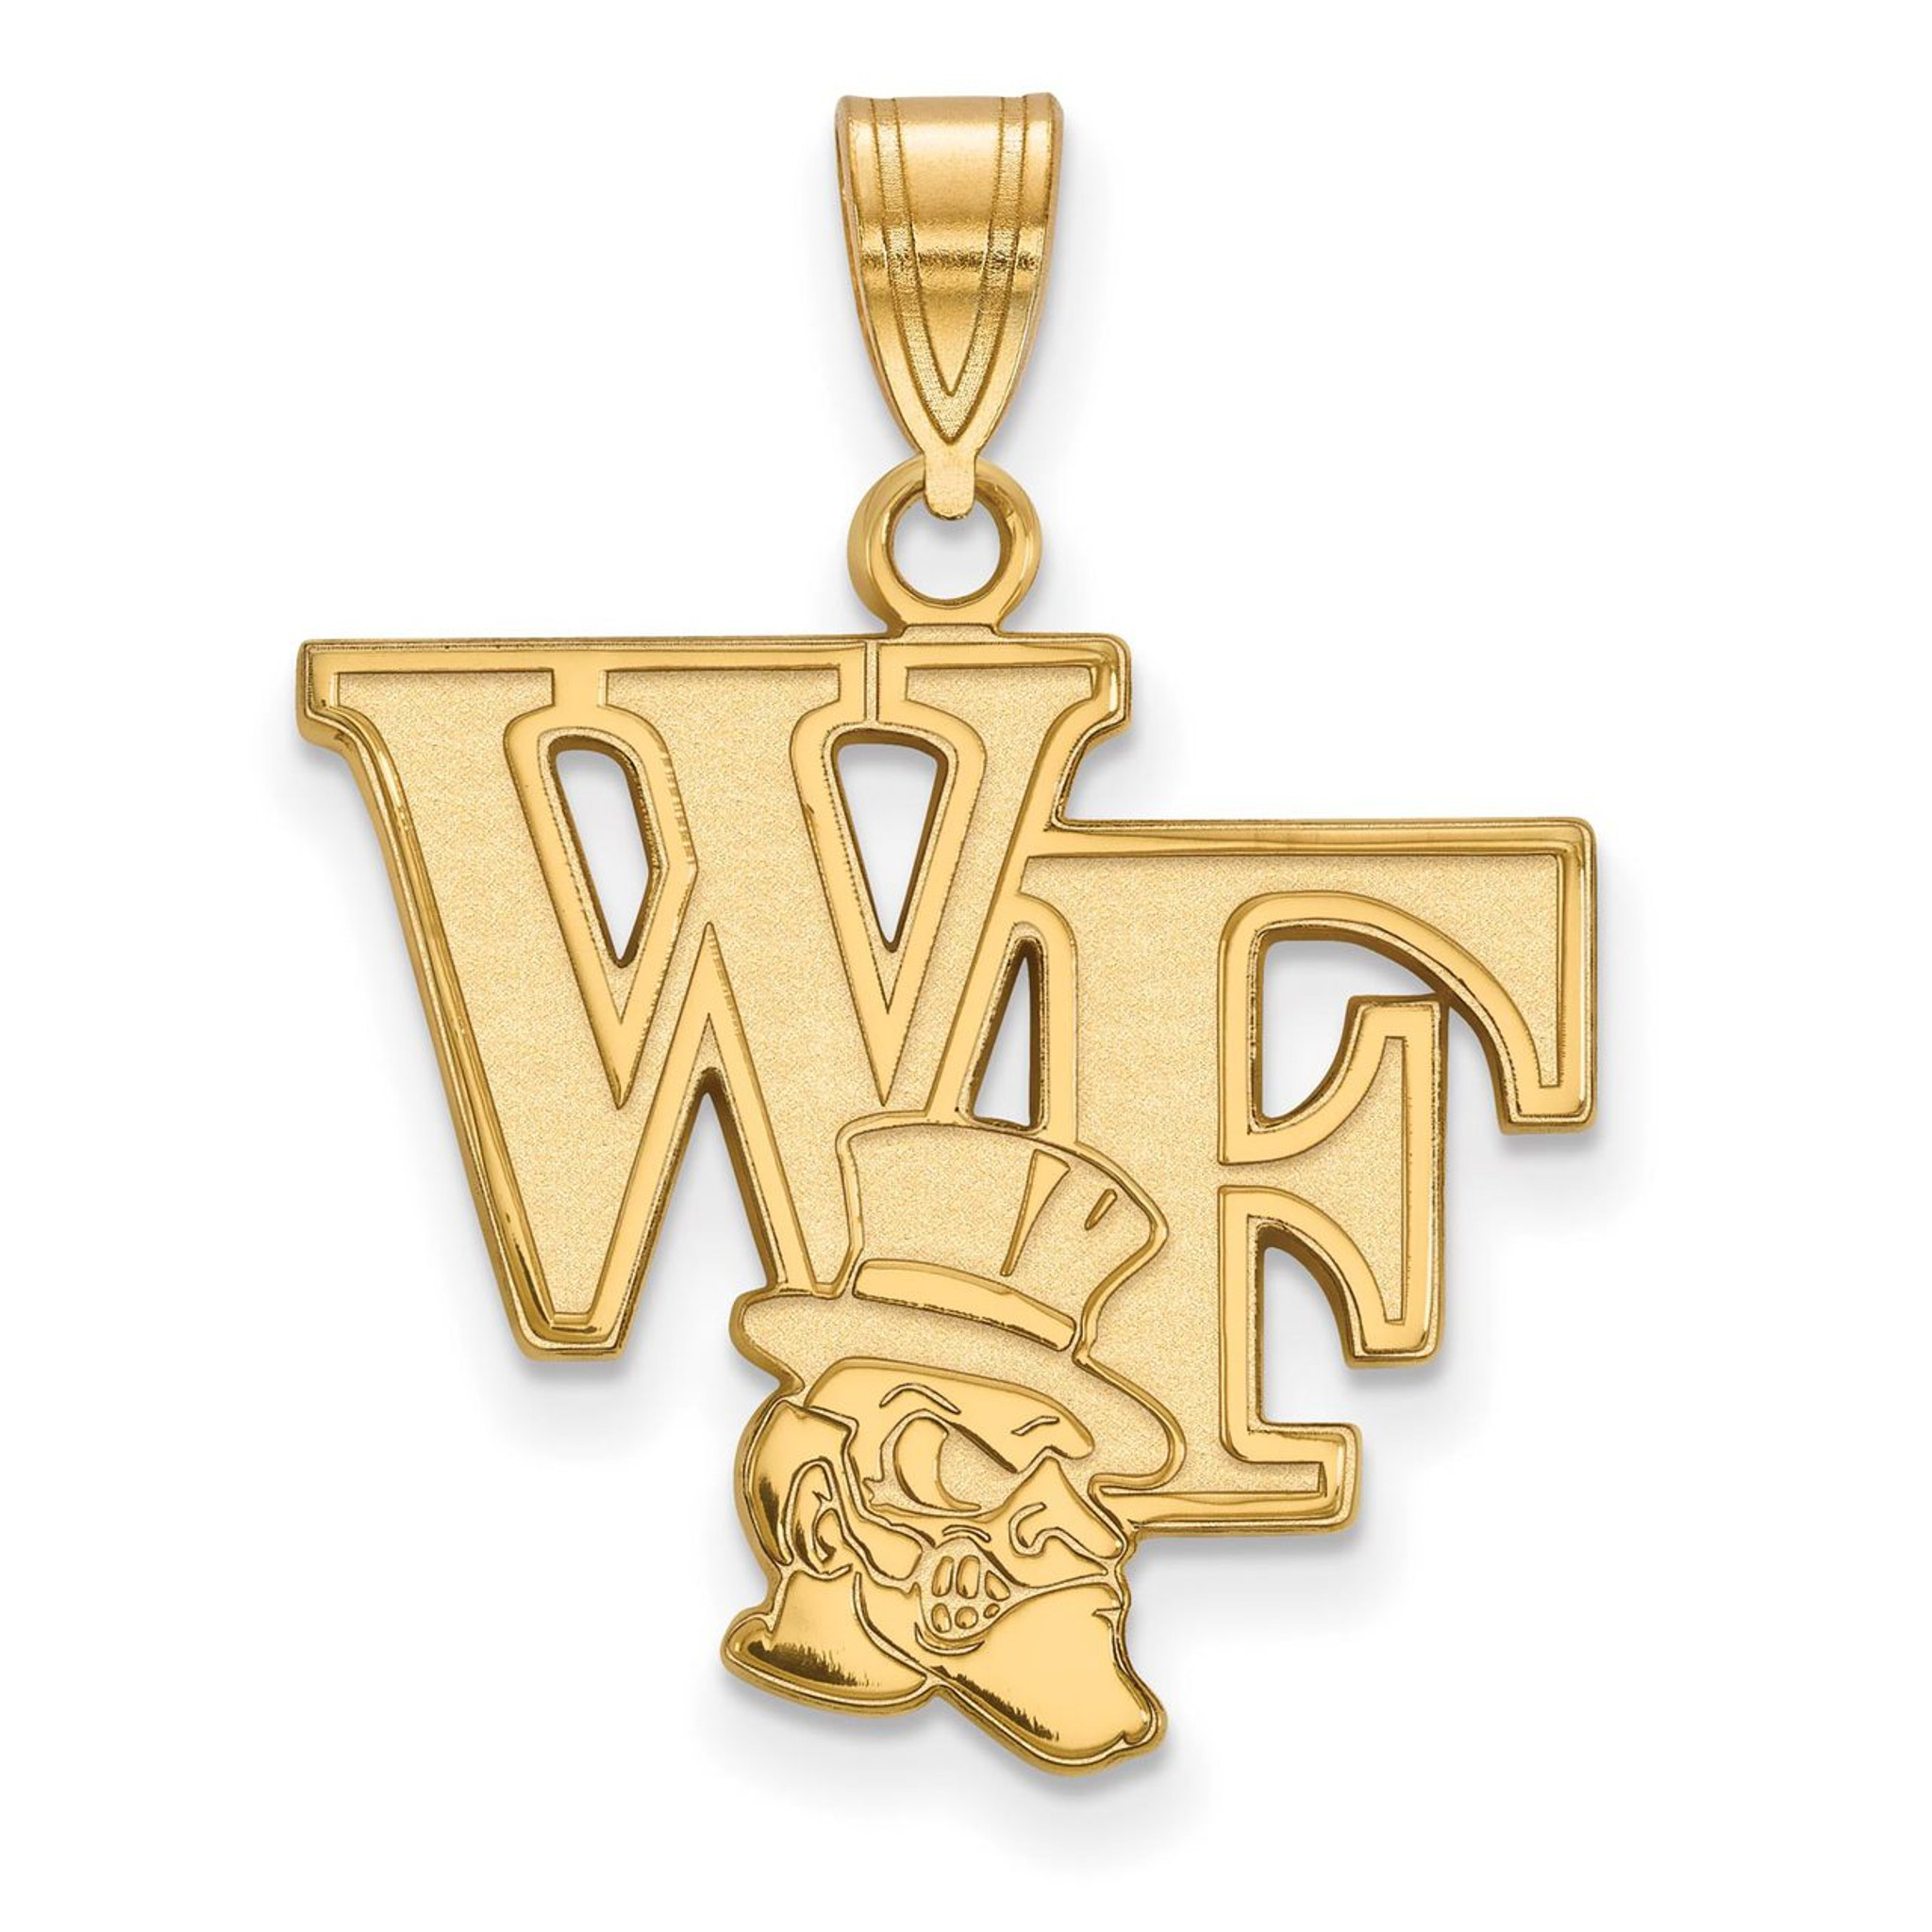 Gold-Plated Sterling Silver Wake Forest University Large Pendant LogoArt GP004WFU